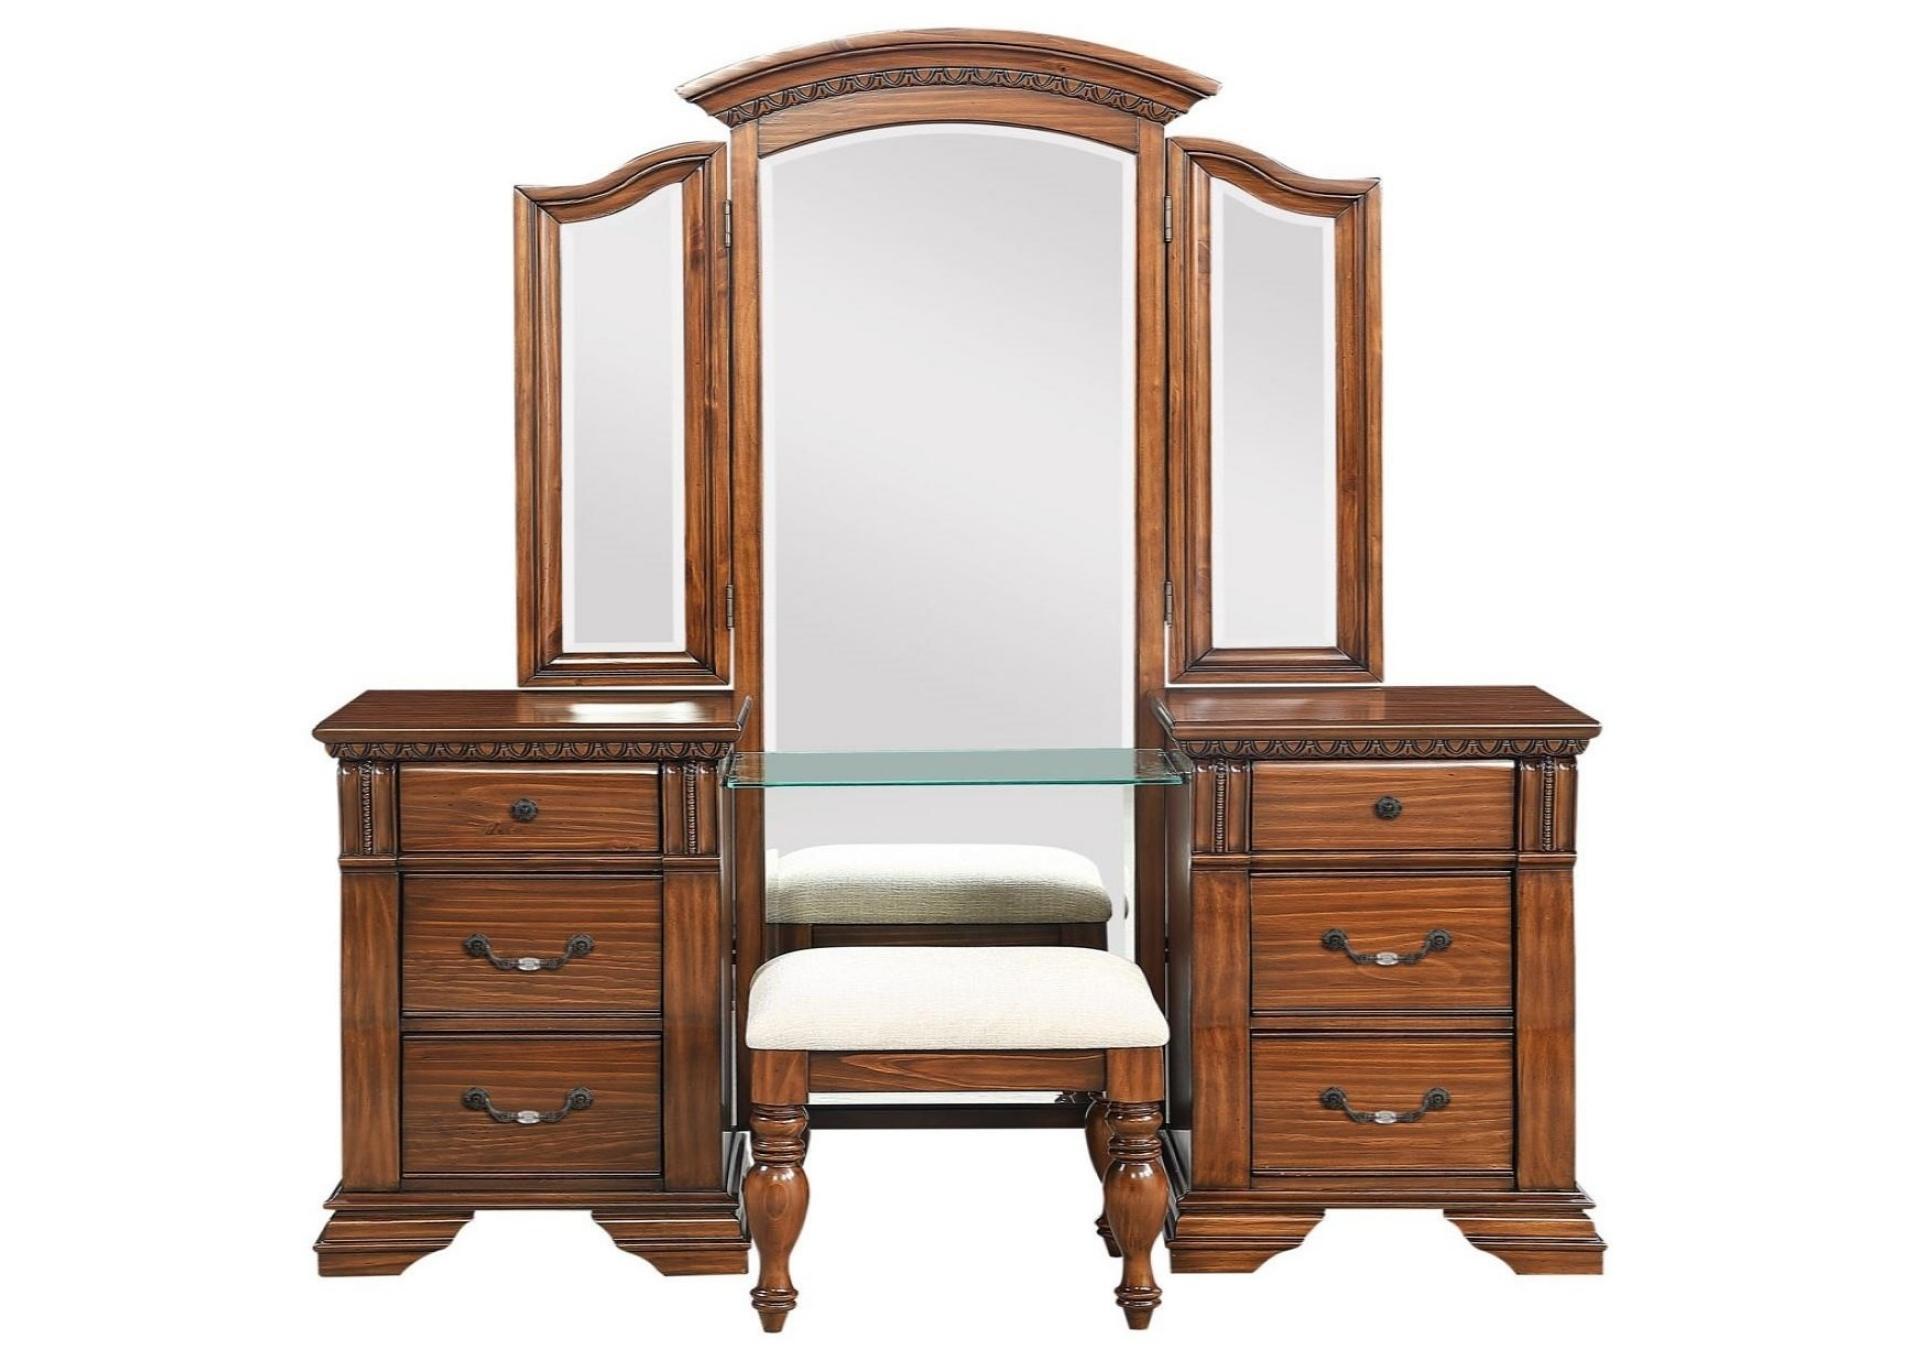 ISABELLA VANITY WITH MIRROR AND STOOL,AUSTIN GROUP